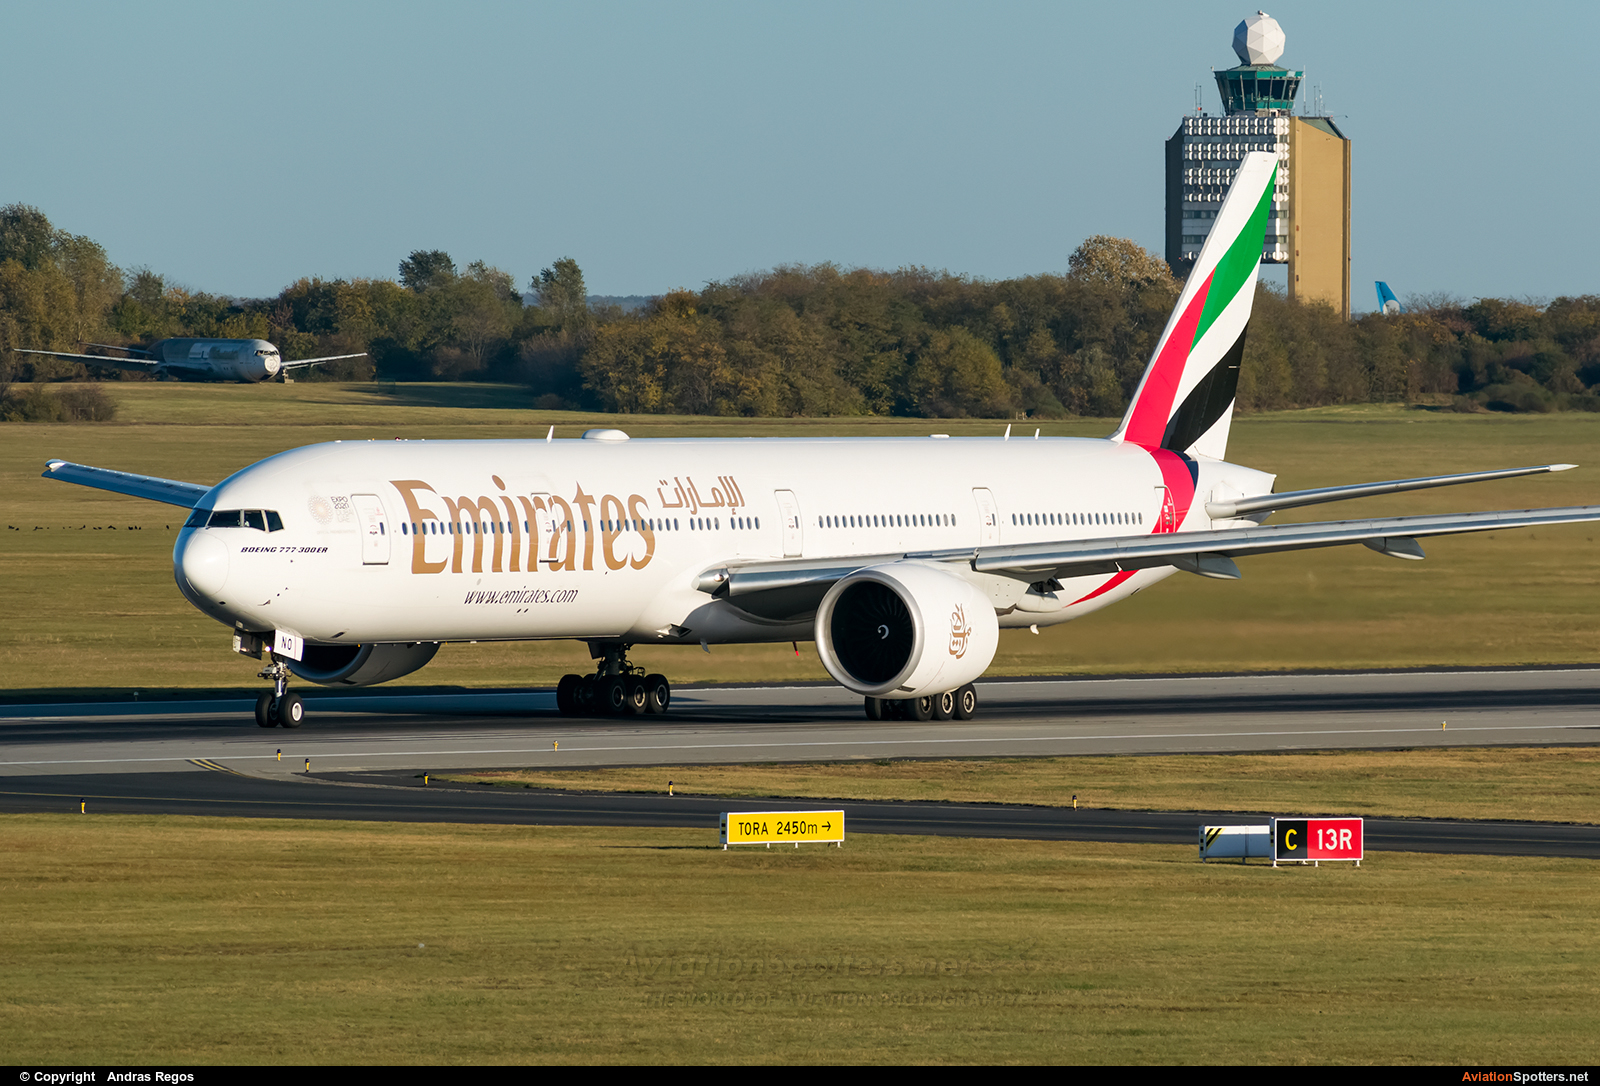 Emirates Airlines  -  777-300ER  (A6-ENO) By Andras Regos (regos)